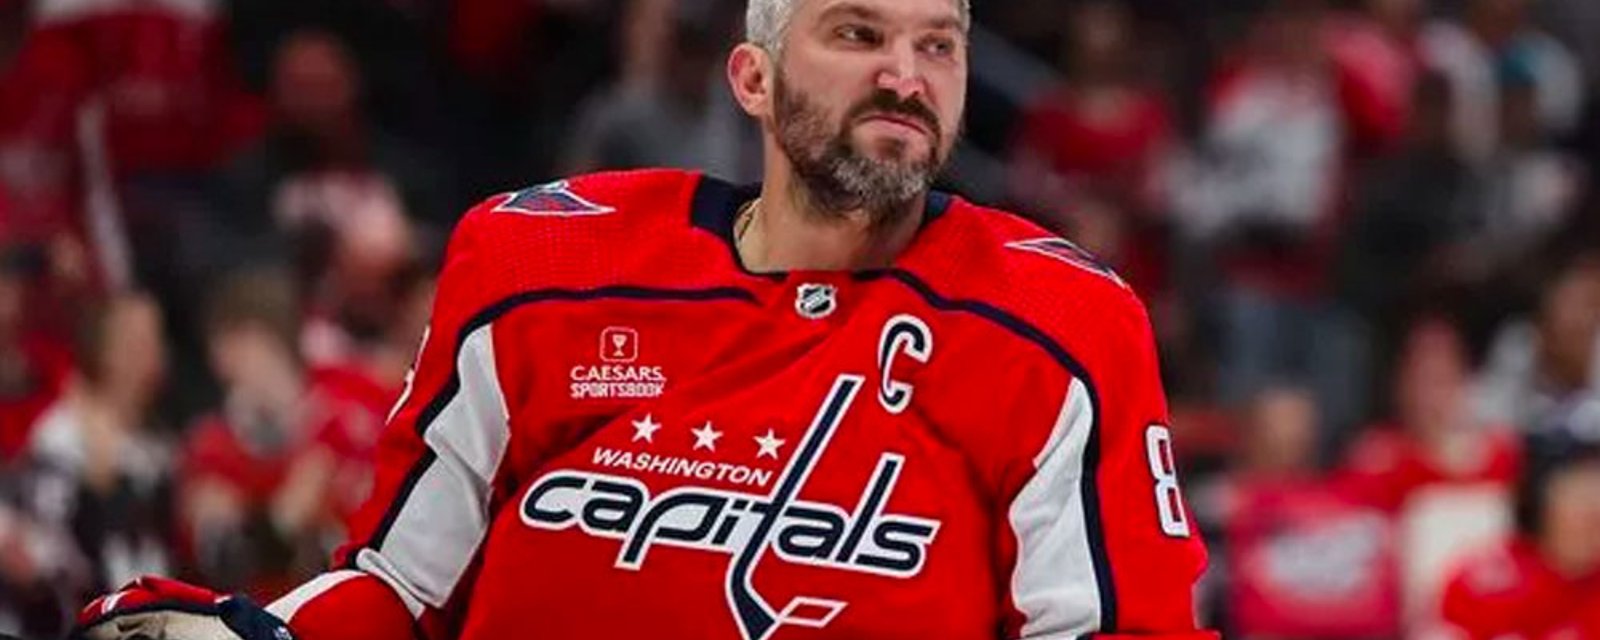 Major development with Ovechkin has fans worried about his NHL future